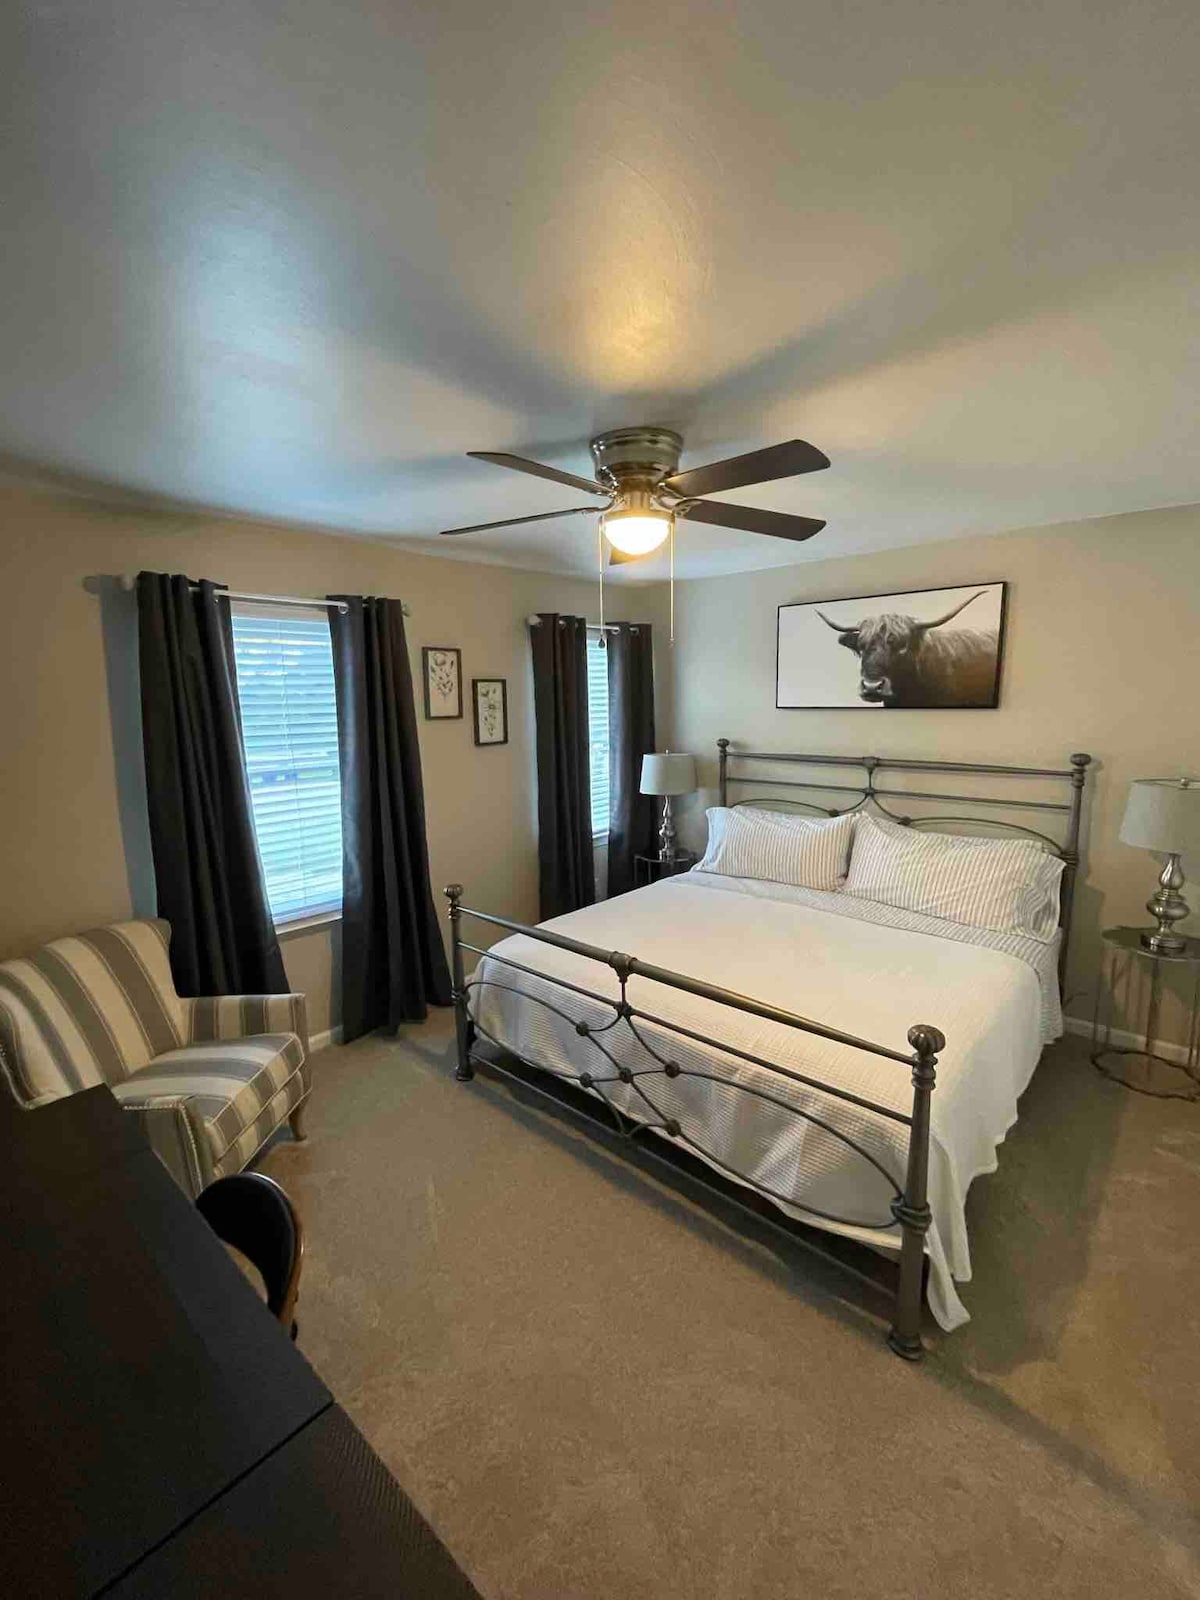 New casino nearby! King Bed, Two Bdrm, 1 1/2 Bth